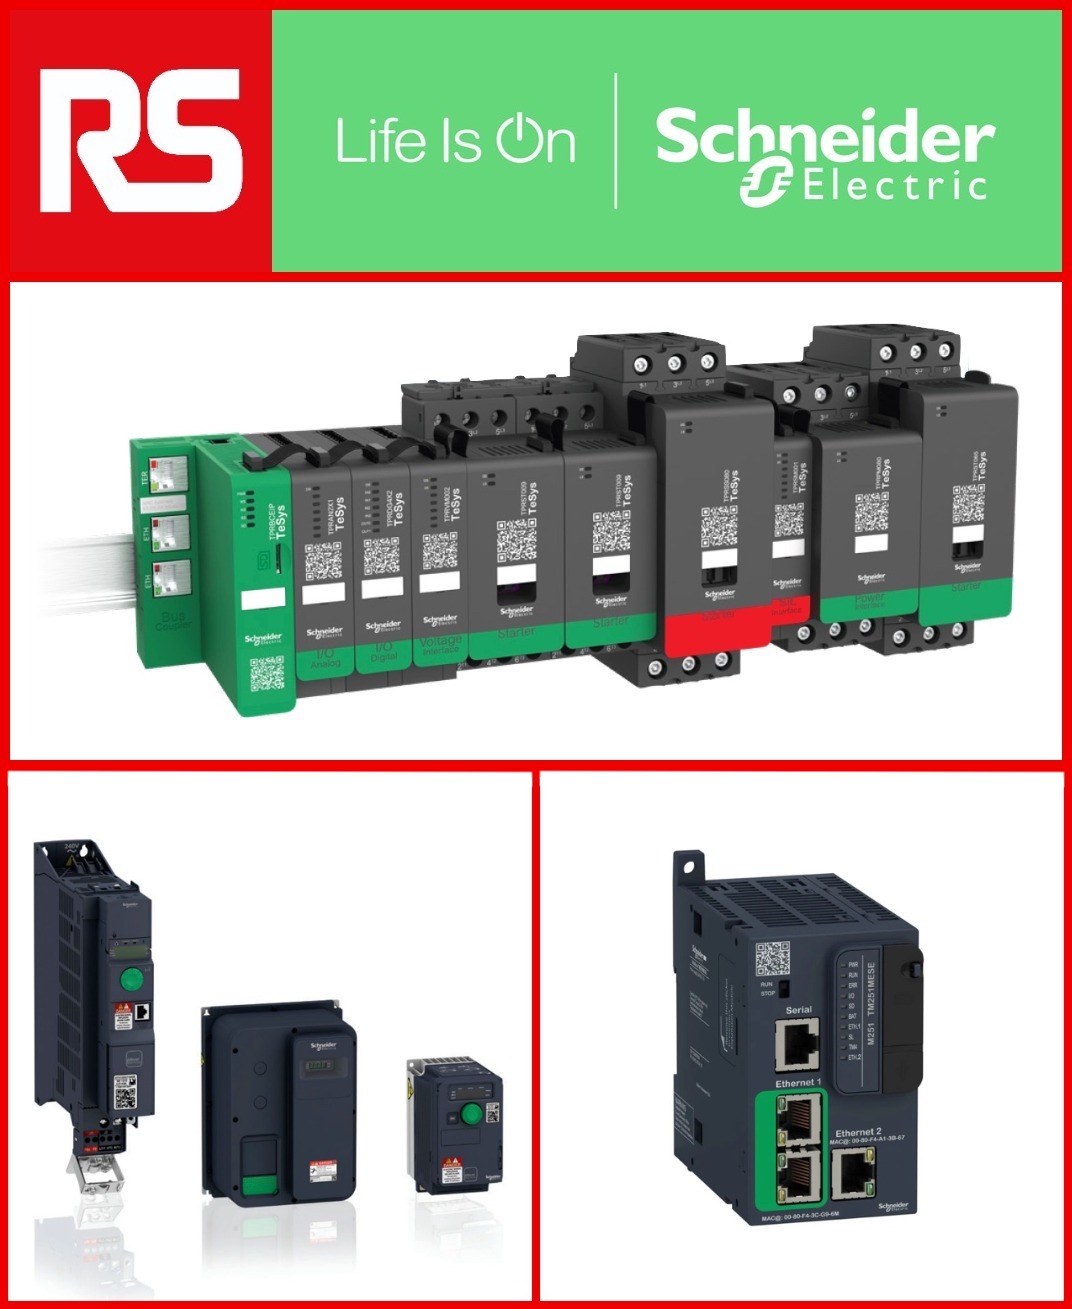 Optimize Your Industrial Operations With Schneider Electric's Smart Motor Control Solutions, Available at RS